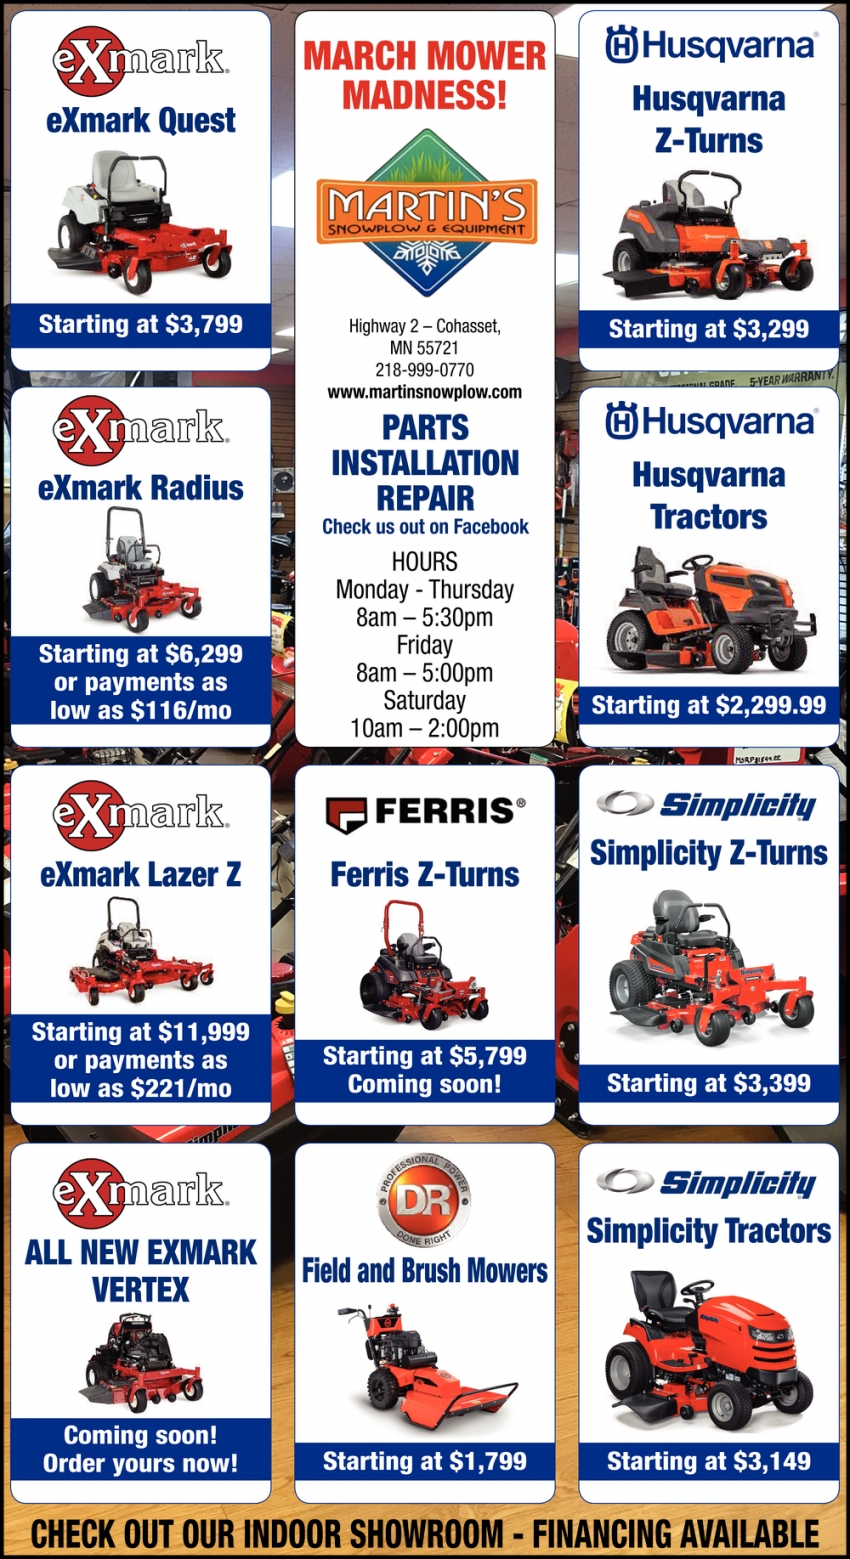 March Mower Madness!